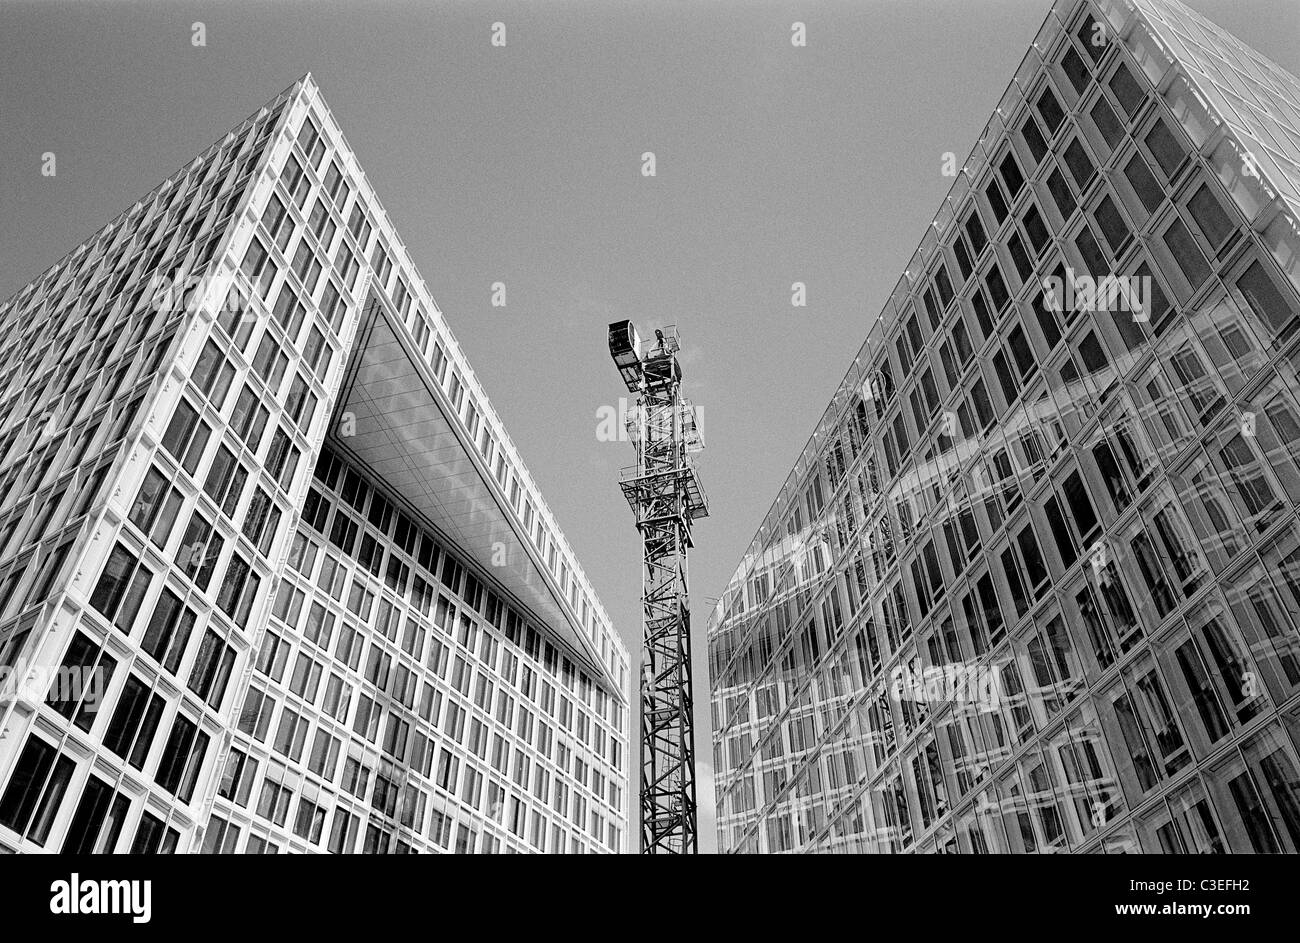 Tower crane being dismantled at the construction site of the new headquarters of Der Spiegel publishing house in Hamburg. Stock Photo